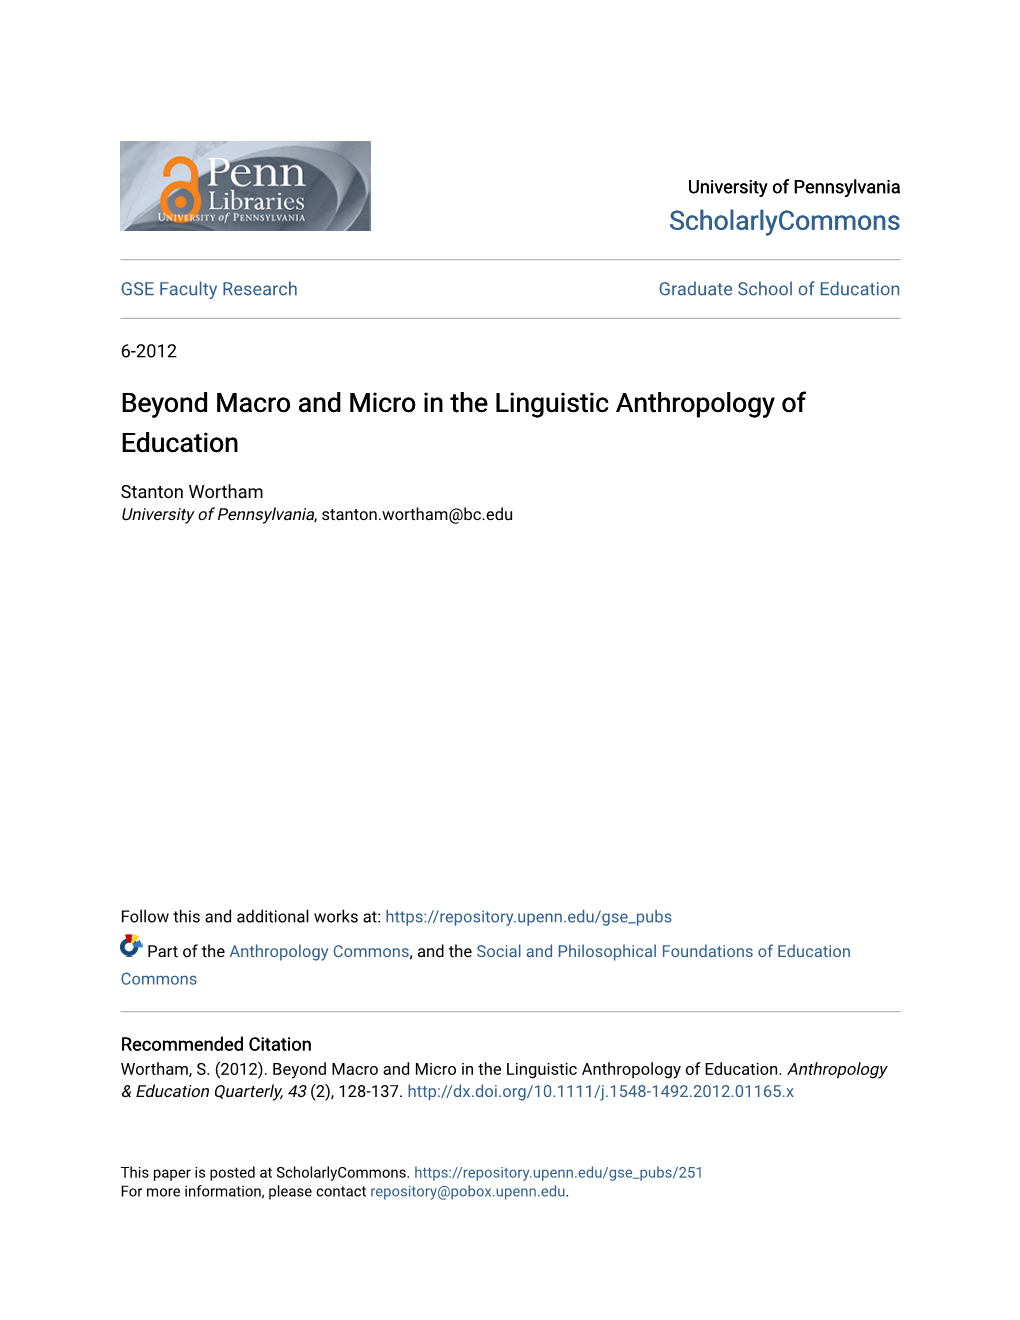 Beyond Macro and Micro in the Linguistic Anthropology of Education